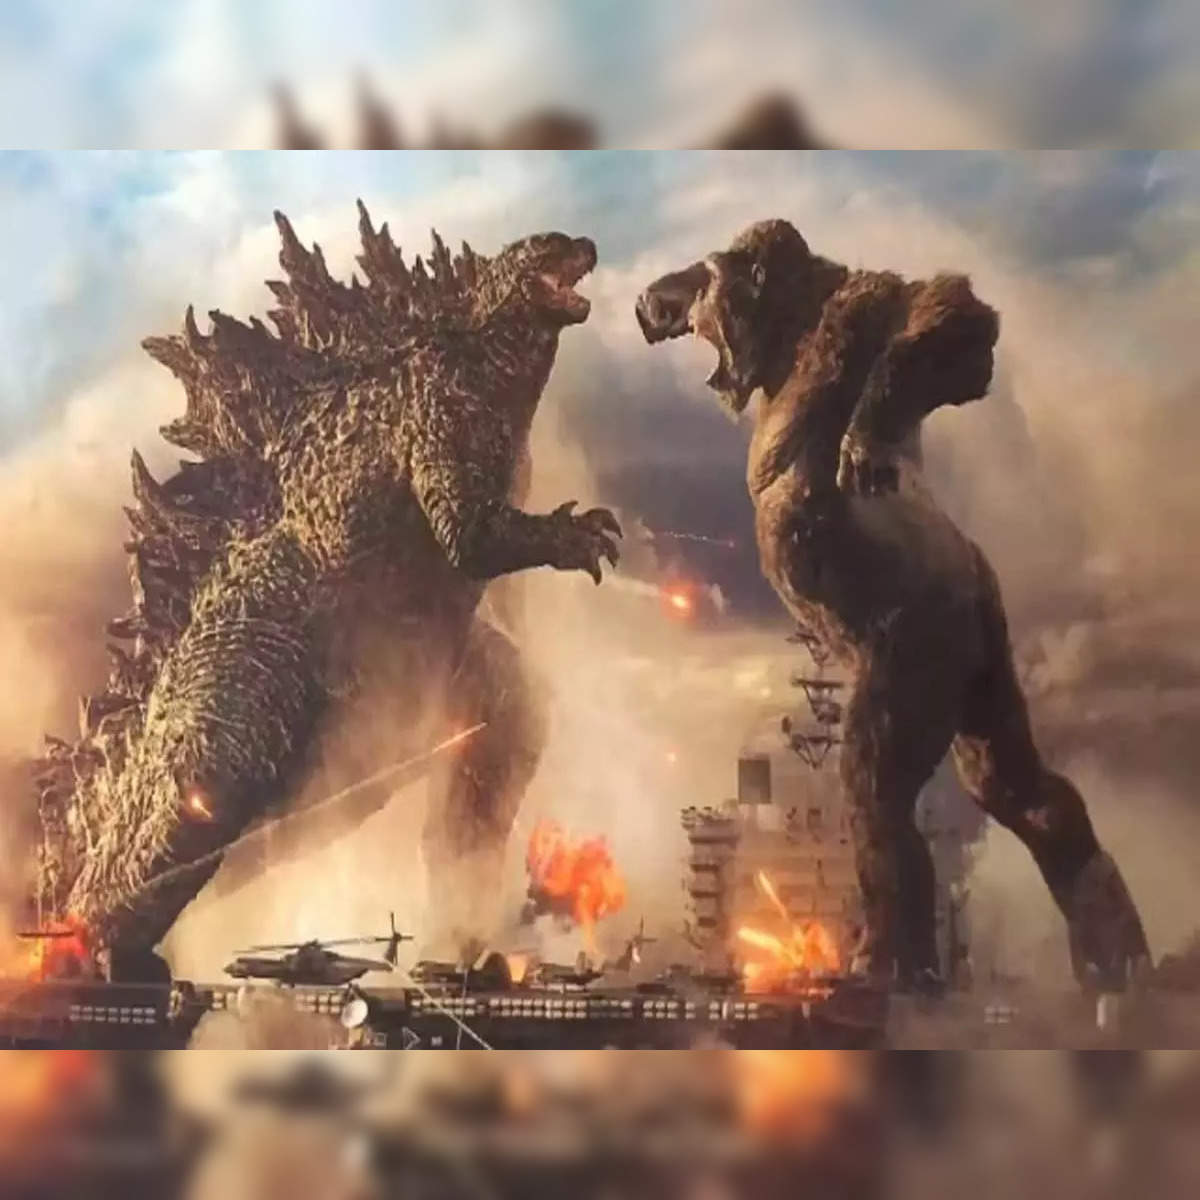 Godzilla x Kong Trailer: Iconic Monsters Become Allies in Epic Battle